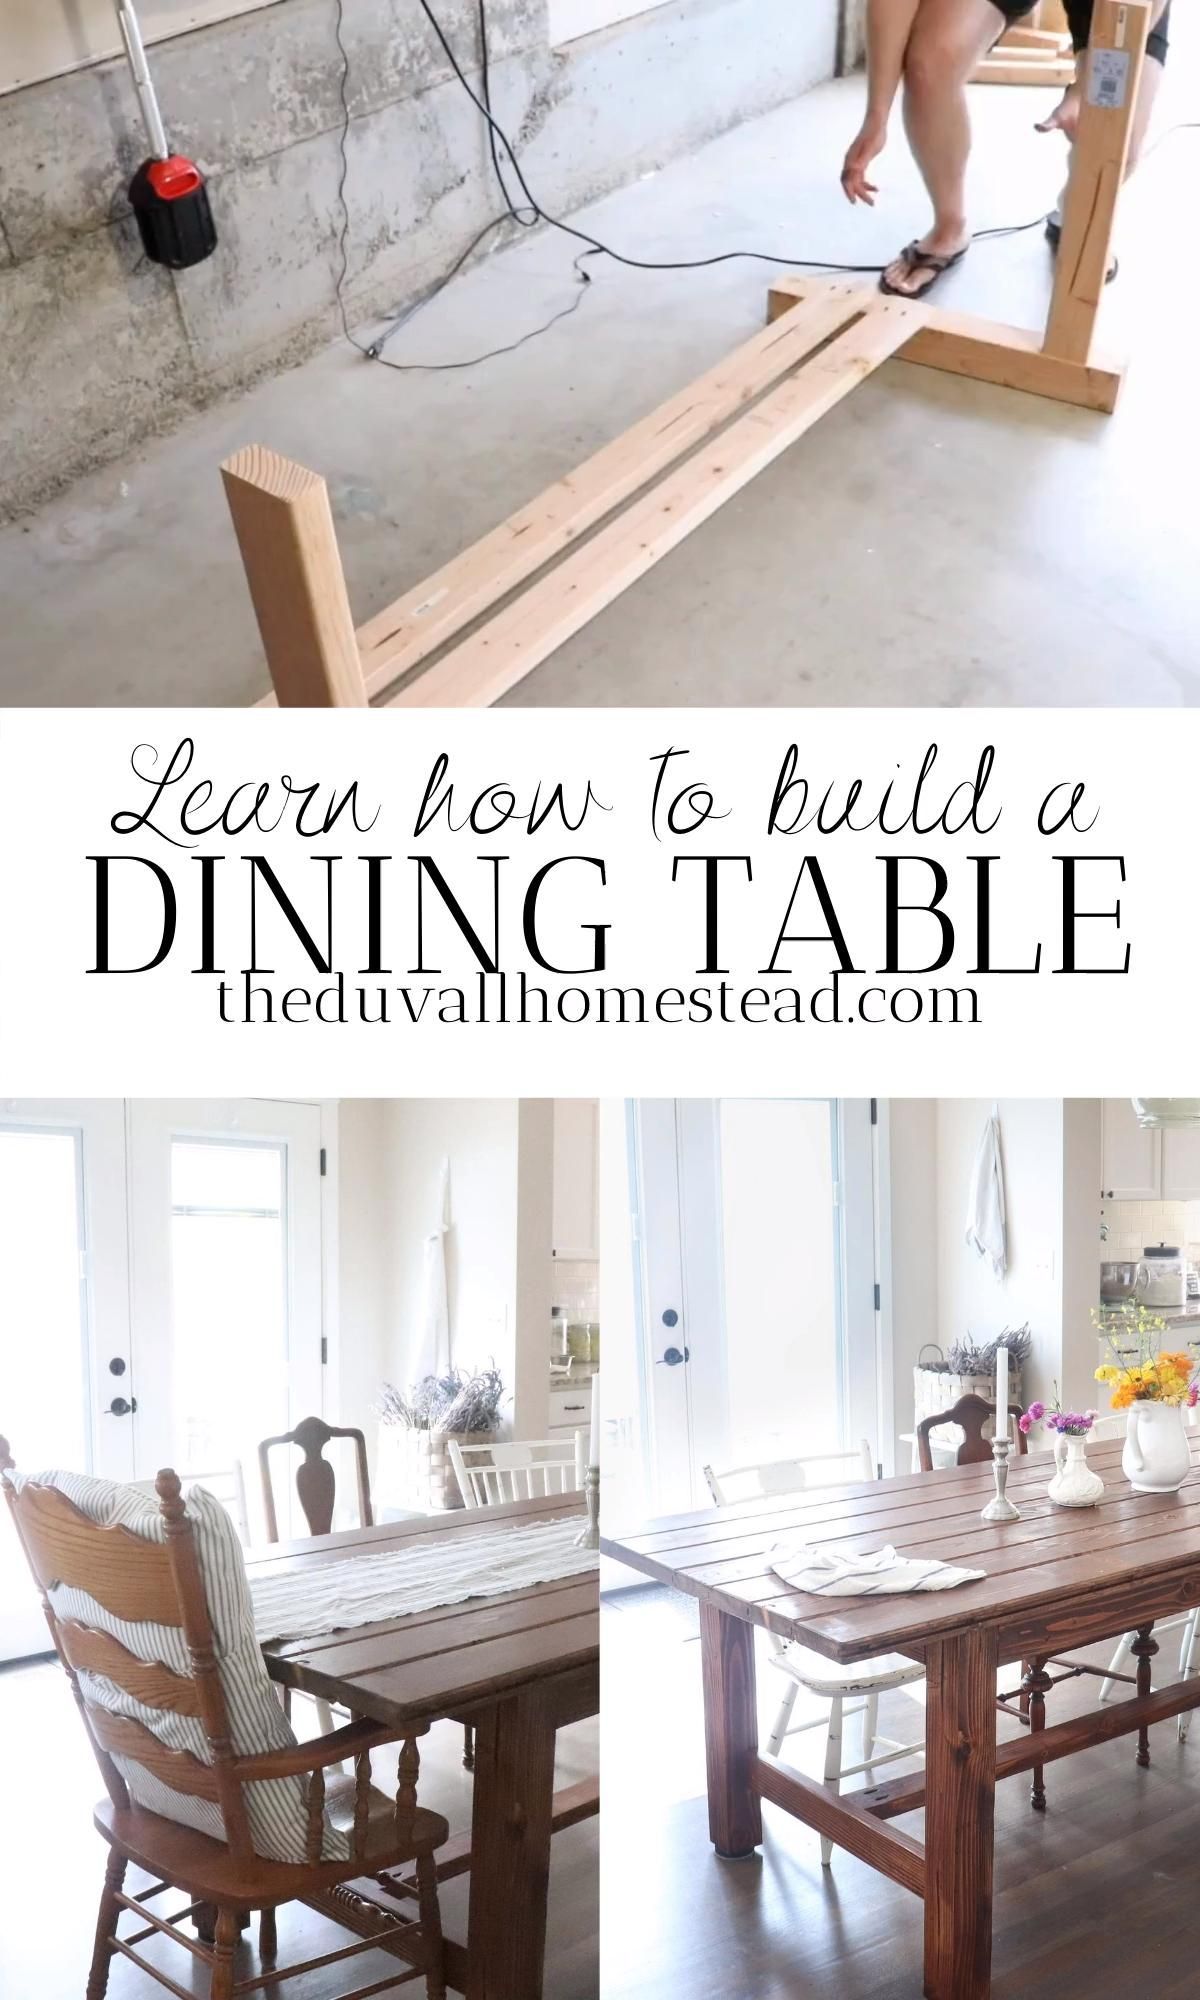 HOW TO BUILD A DINING TABLE for beginners | farmhouse style DIY full tutorial & plans -   19 farmhouse decorations for kitchen table ideas